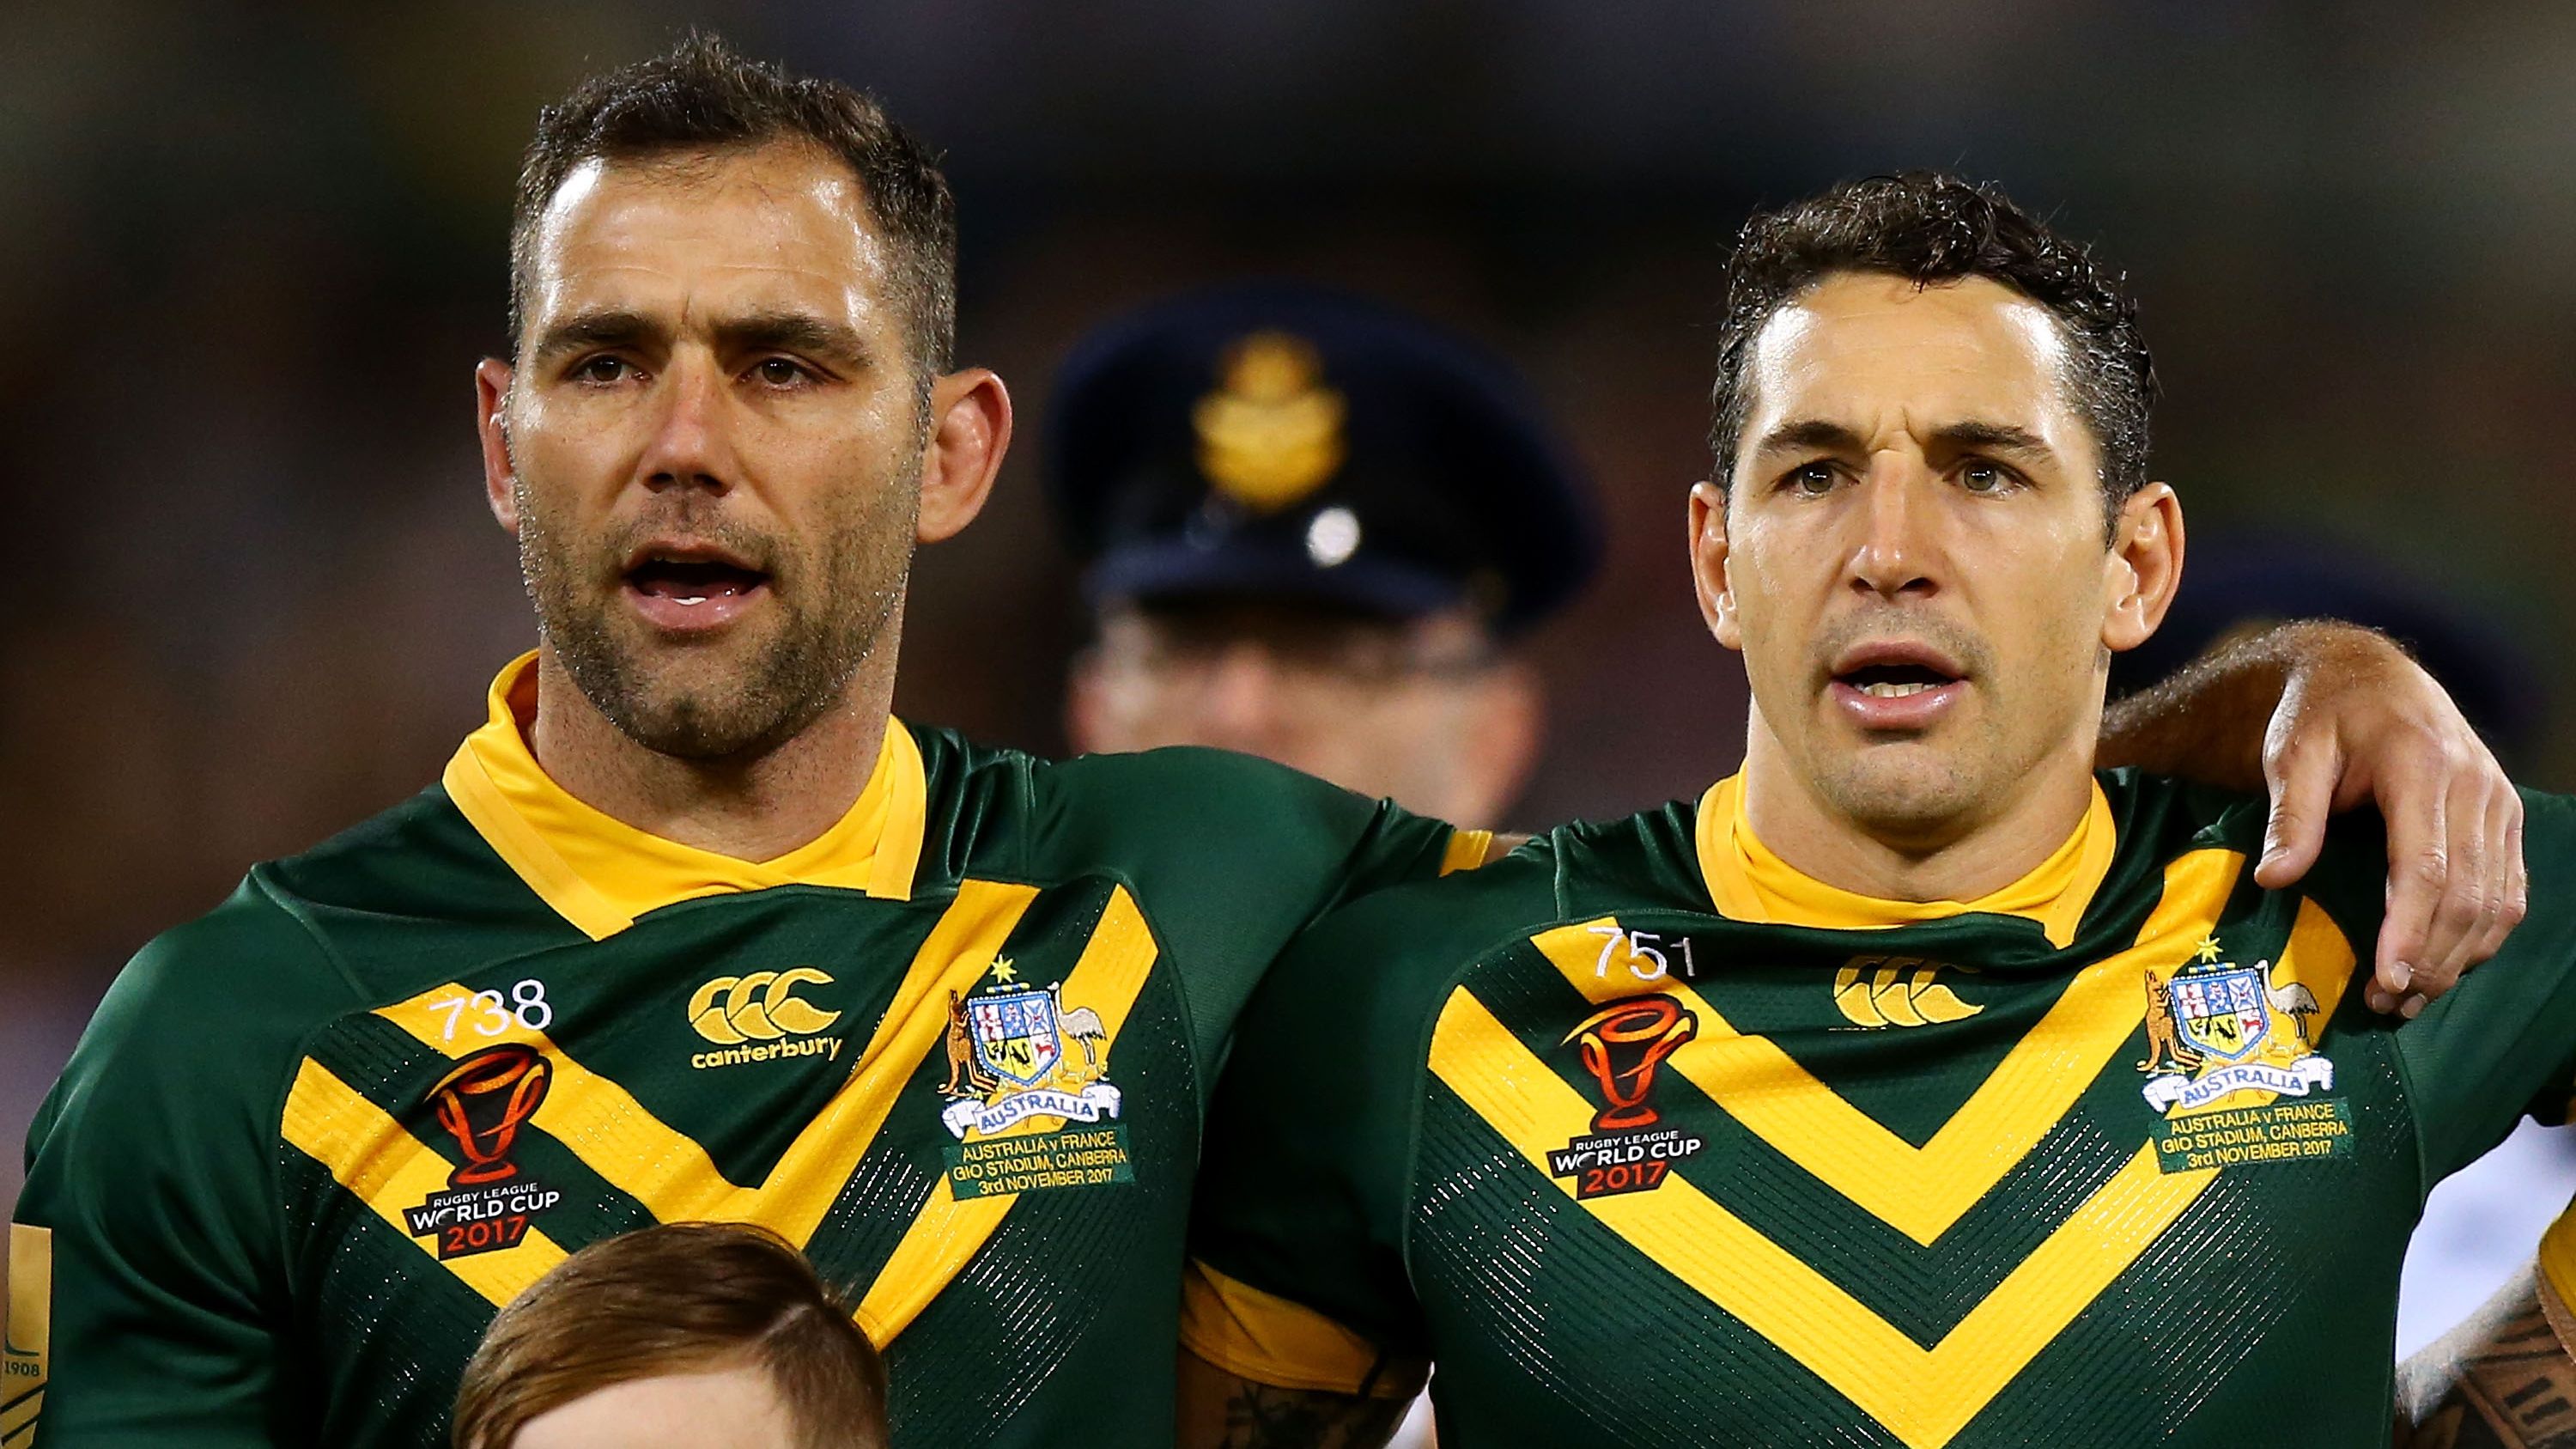 Cameron Smith alongside Kangaroos teammate Billy Slater at the 2017 Rugby League World Cup.